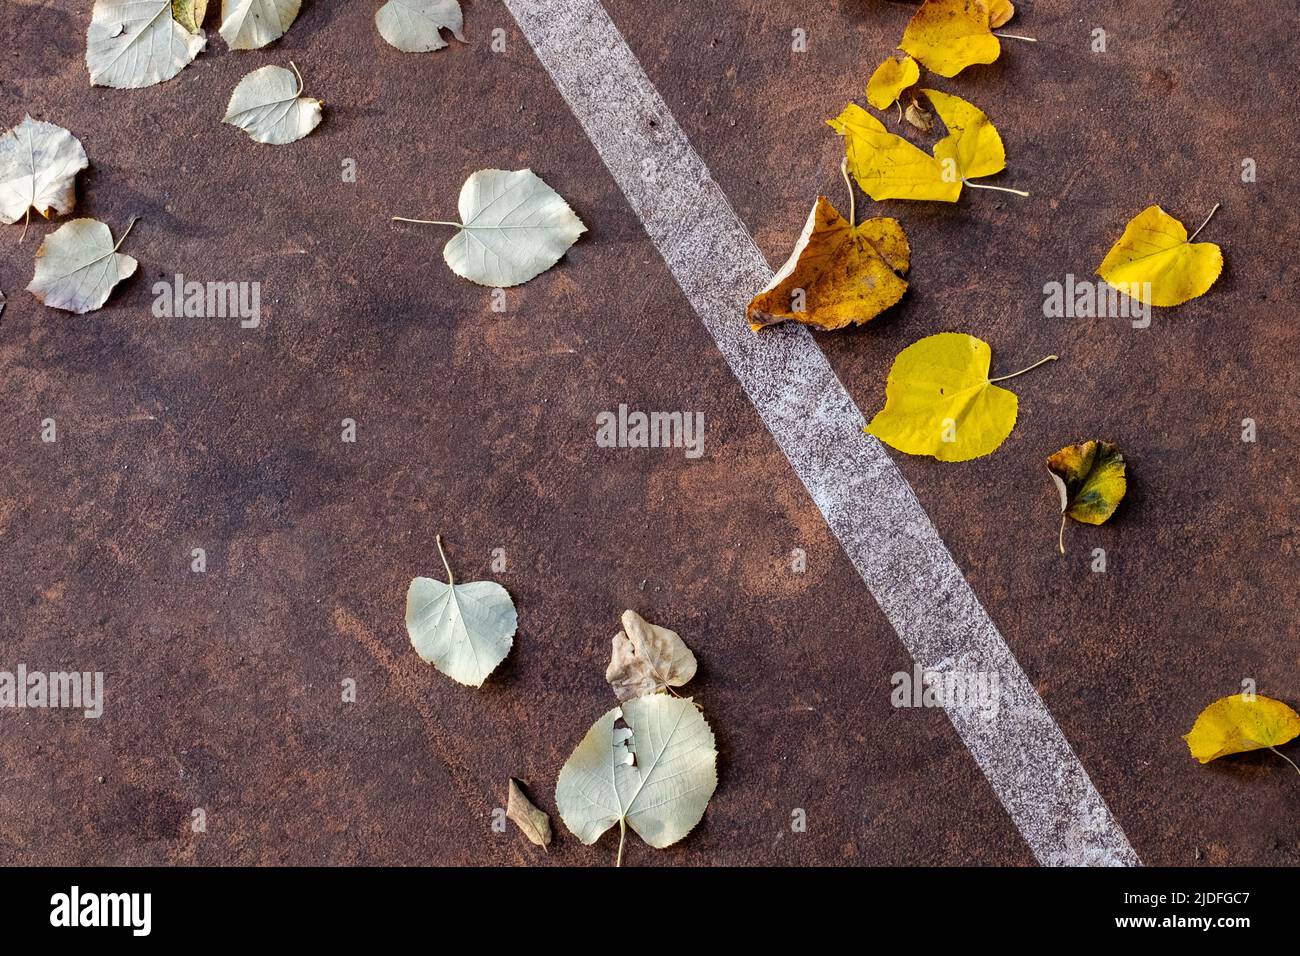 Close-up of autumn leaves fallen on an outdoor playground and arranged differently. A diagonal line clearly separates the leaves. Stock Photo